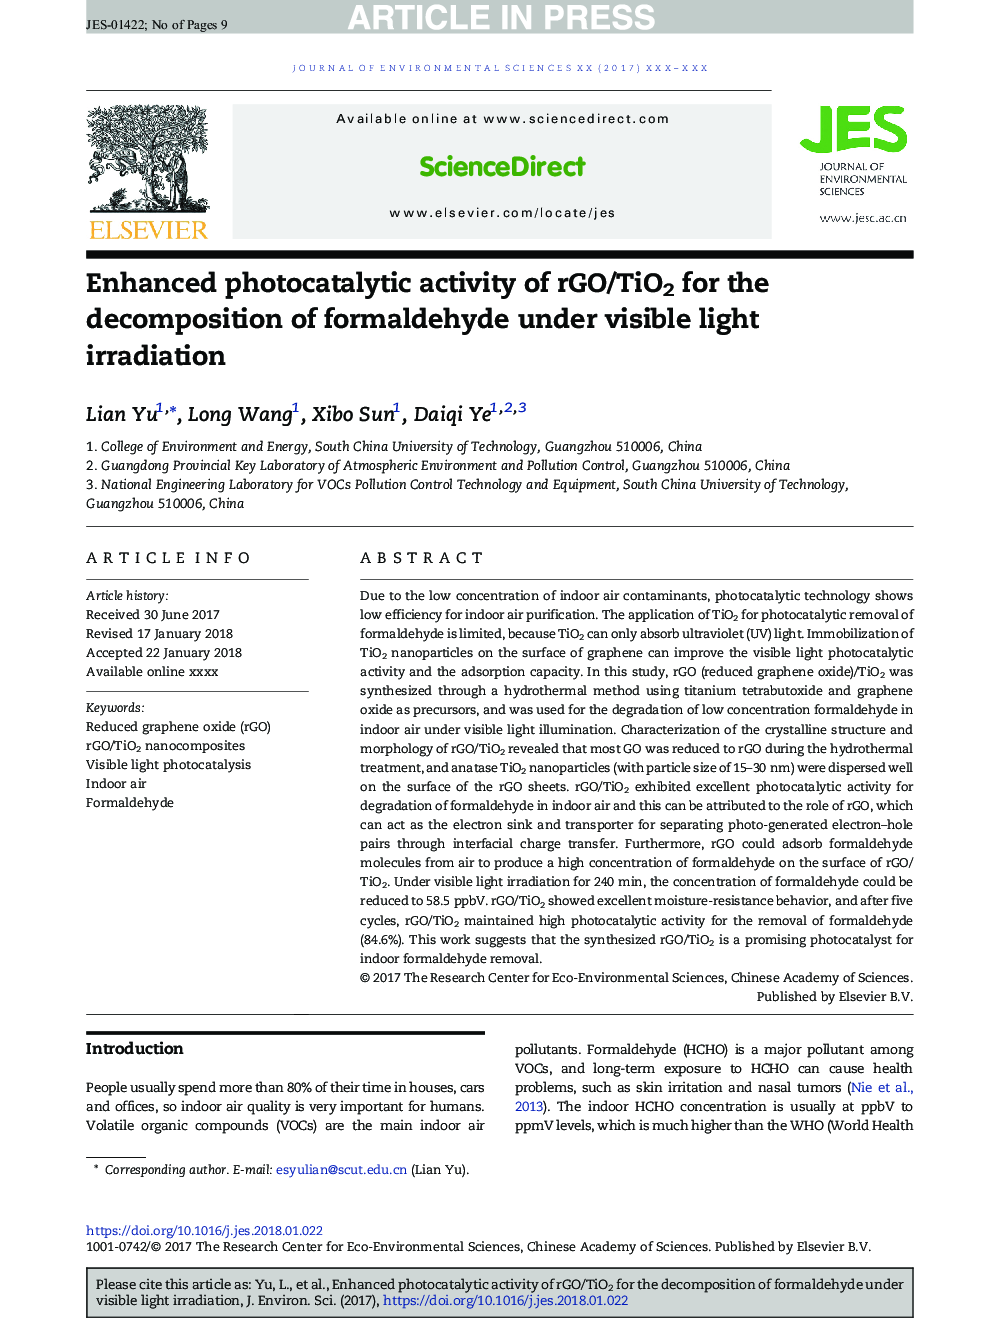 Enhanced photocatalytic activity of rGO/TiO2 for the decomposition of formaldehyde under visible light irradiation